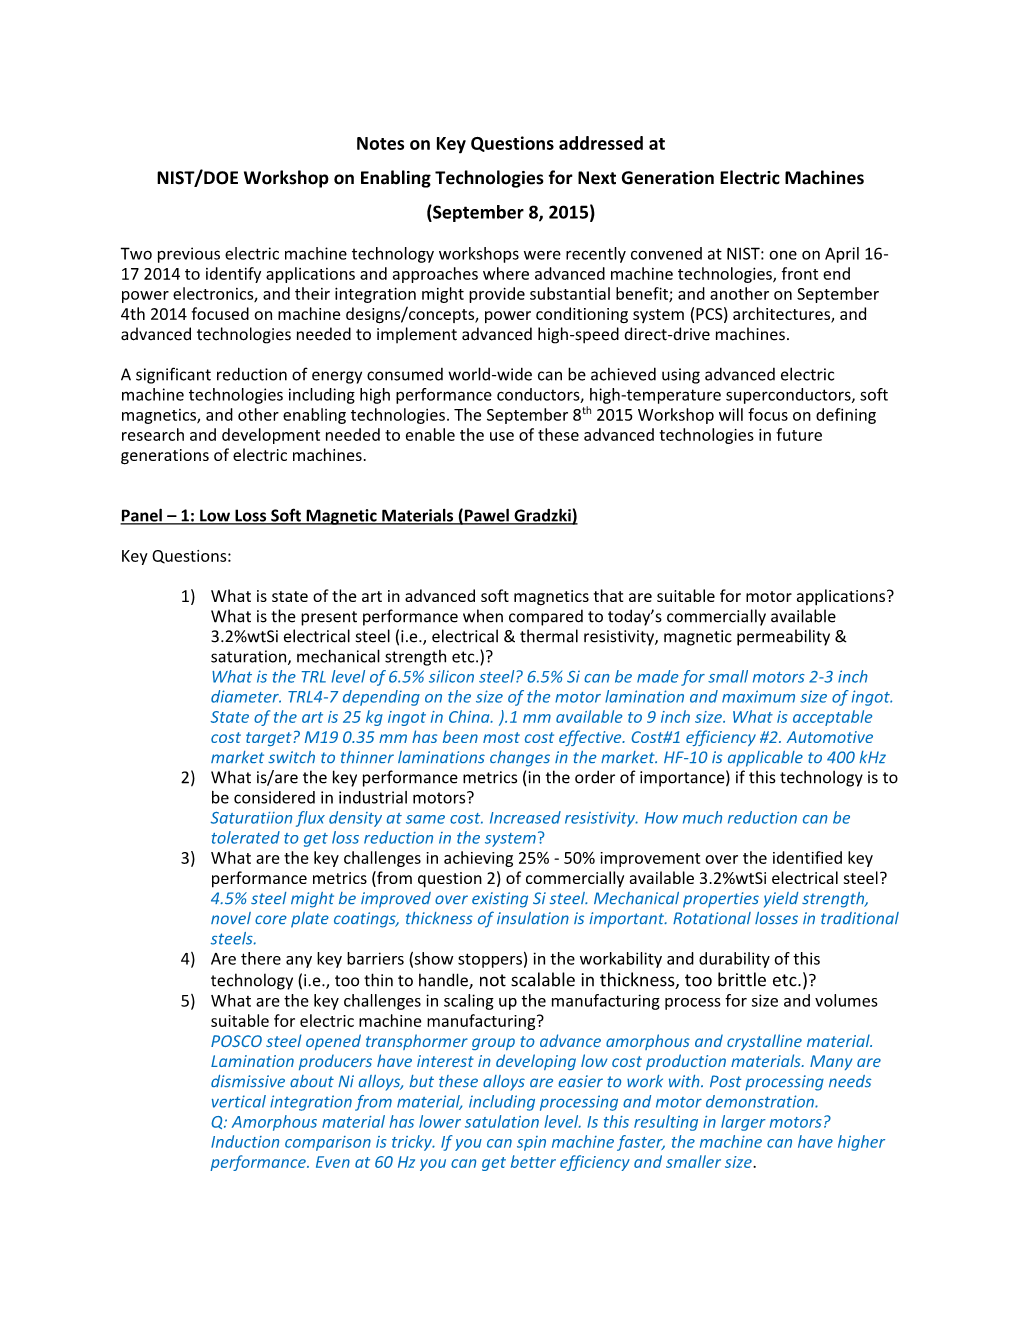 Notes on Key Questions Addressed at NIST/DOE Workshop on Enabling Technologies for Next Generation Electric Machines (September 8, 2015)